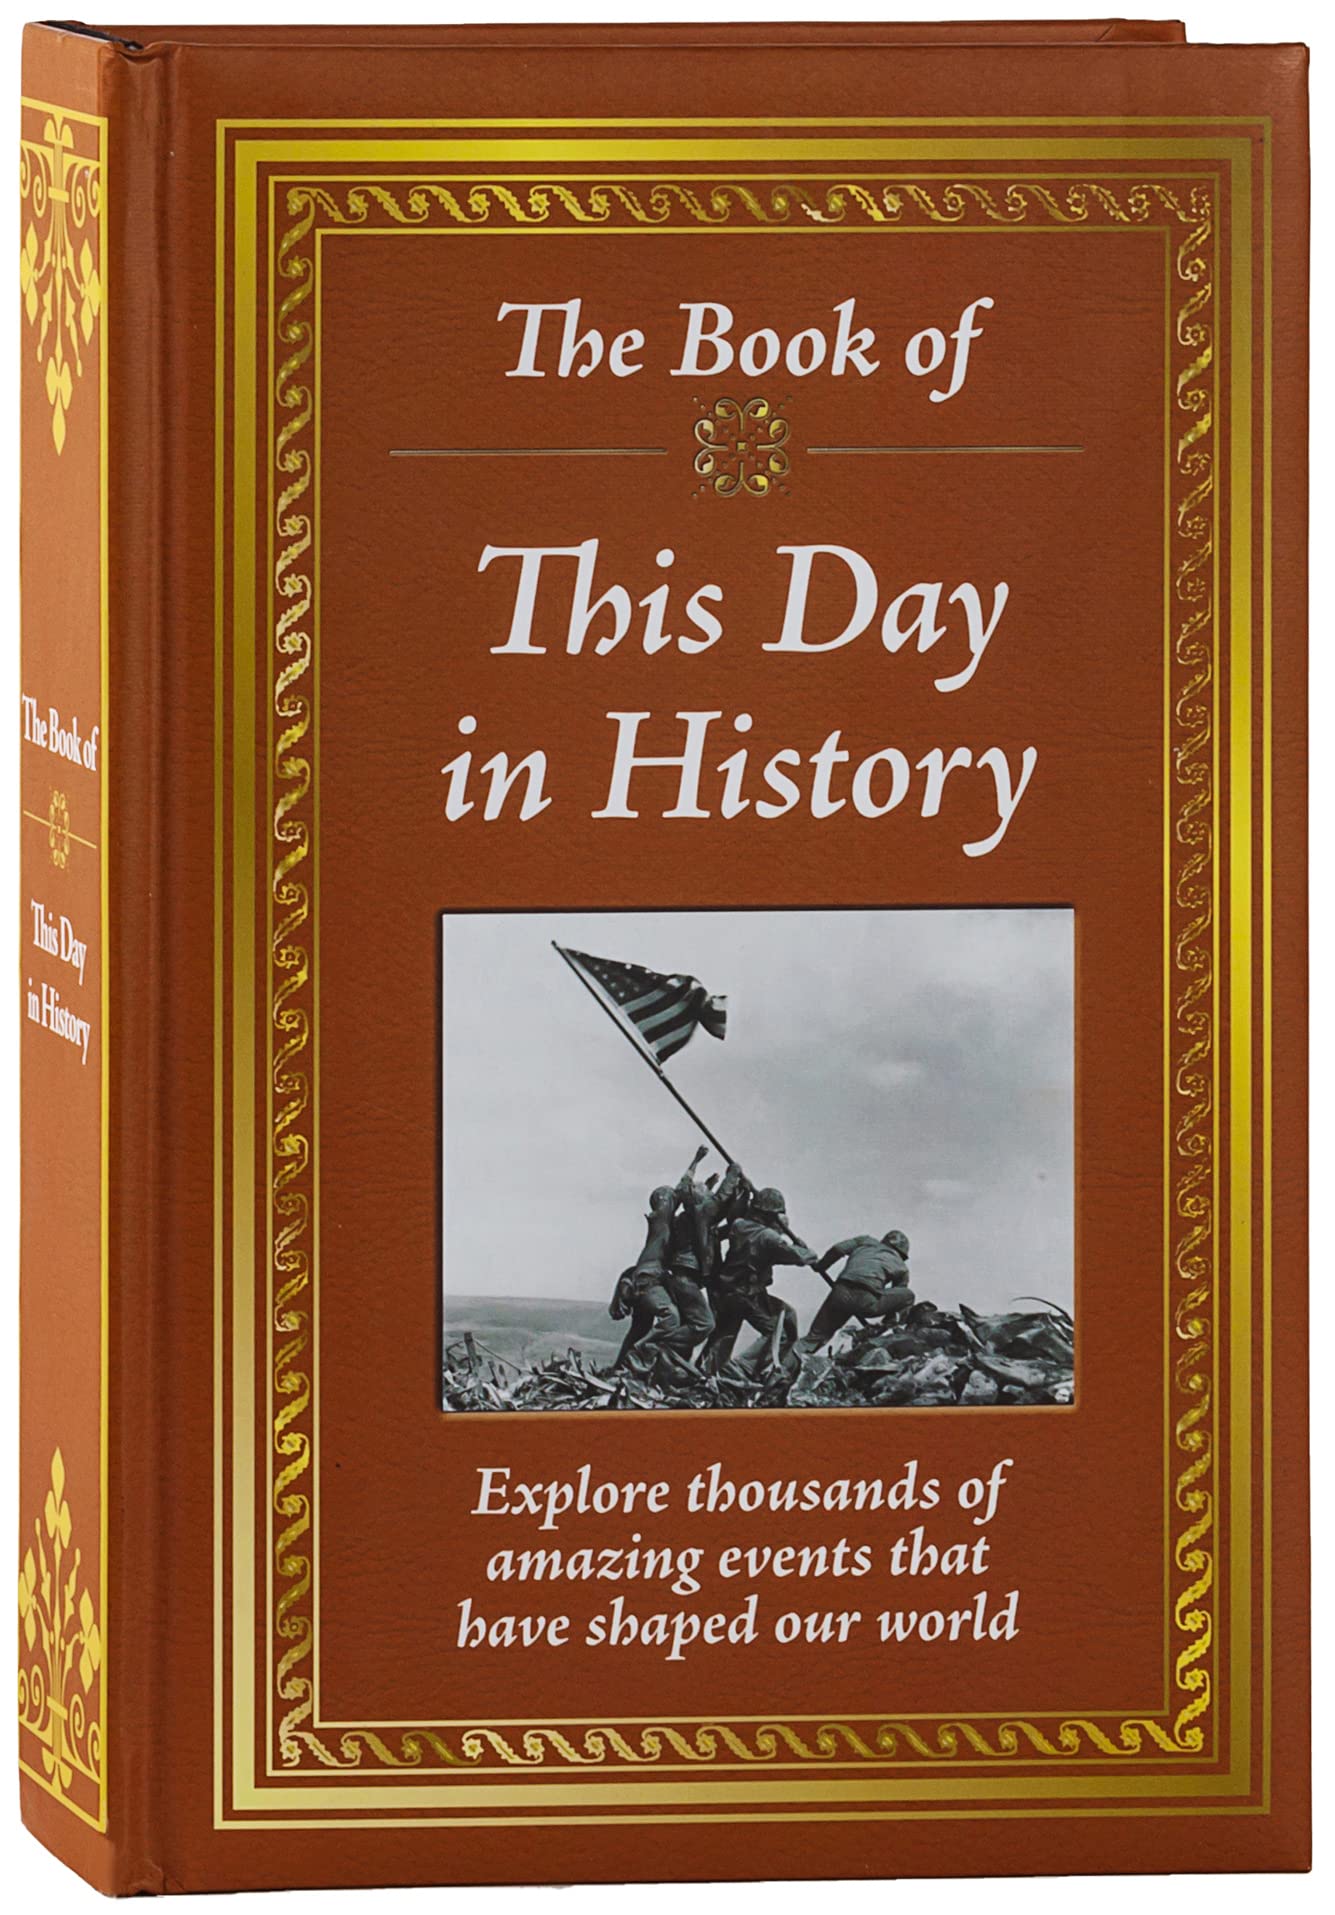 The Book of This Day in History by Publications International Ltd